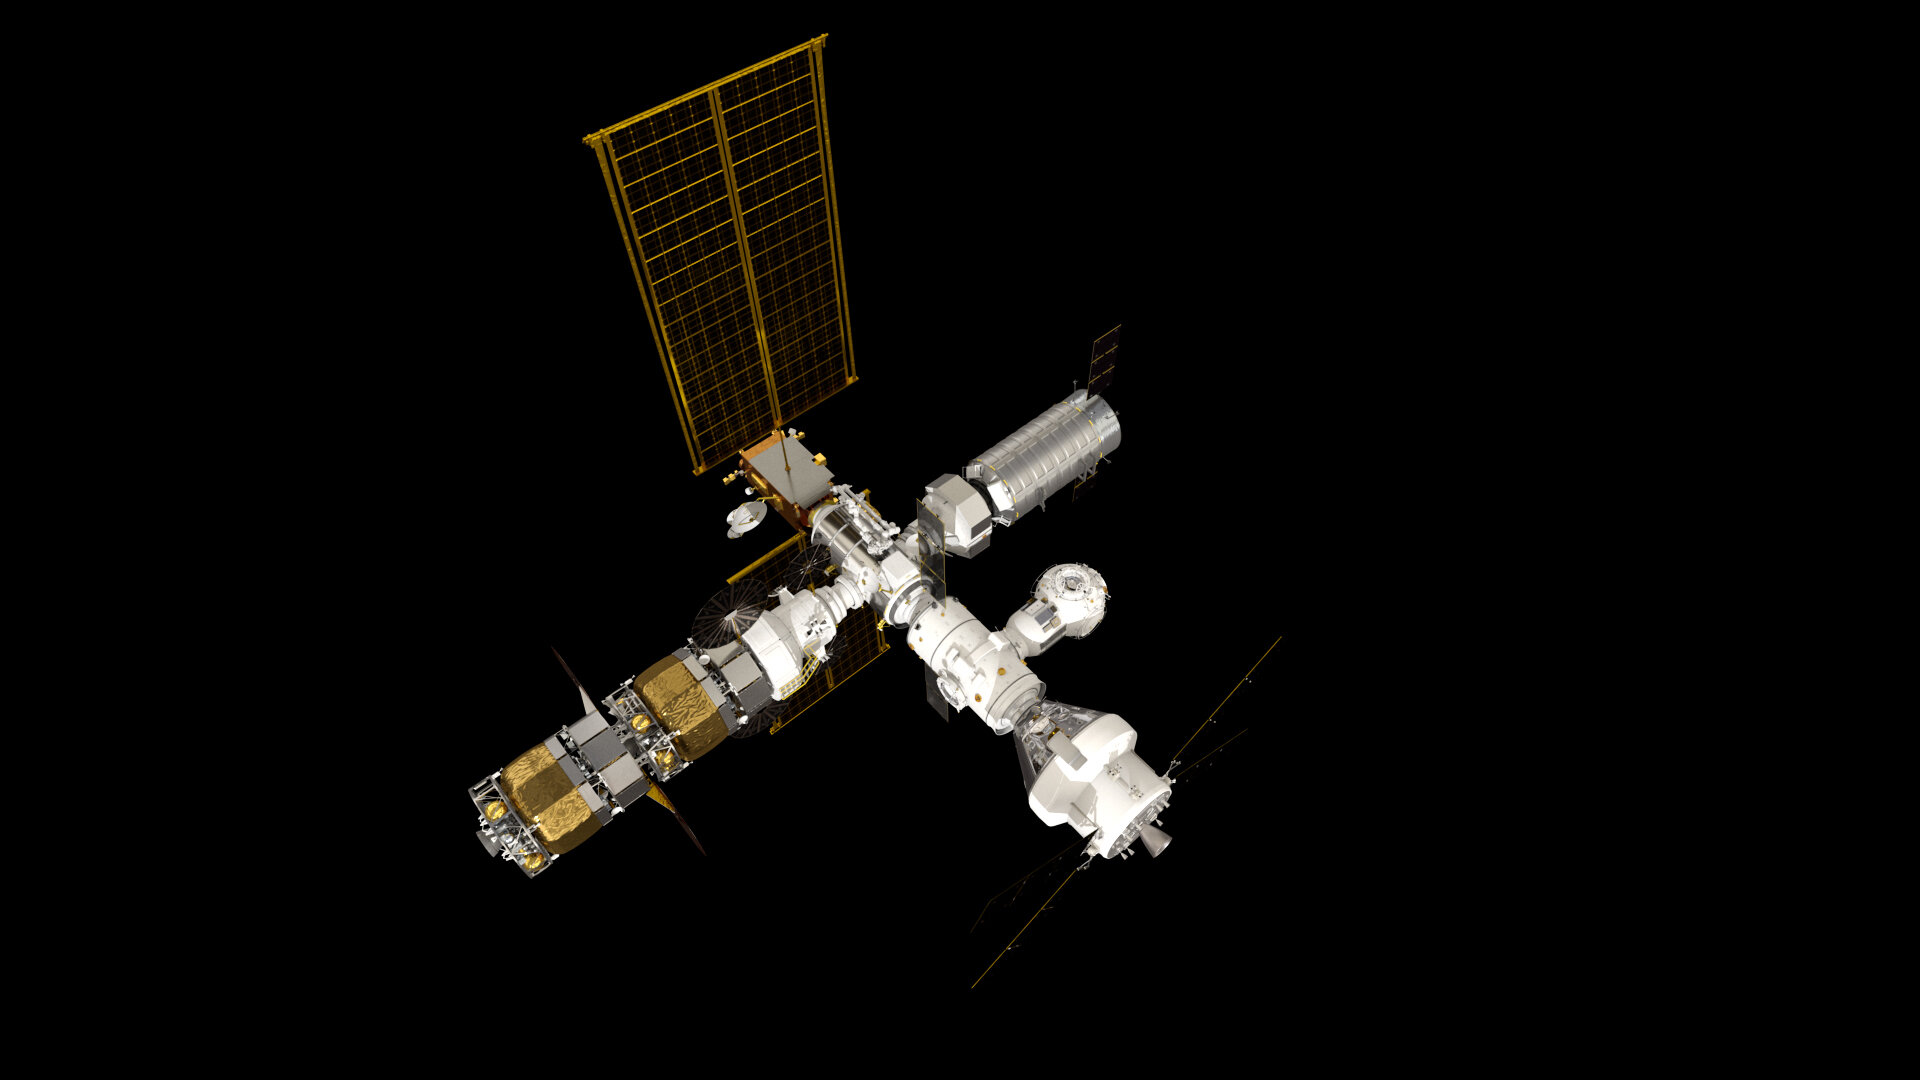 Gateway with Orion